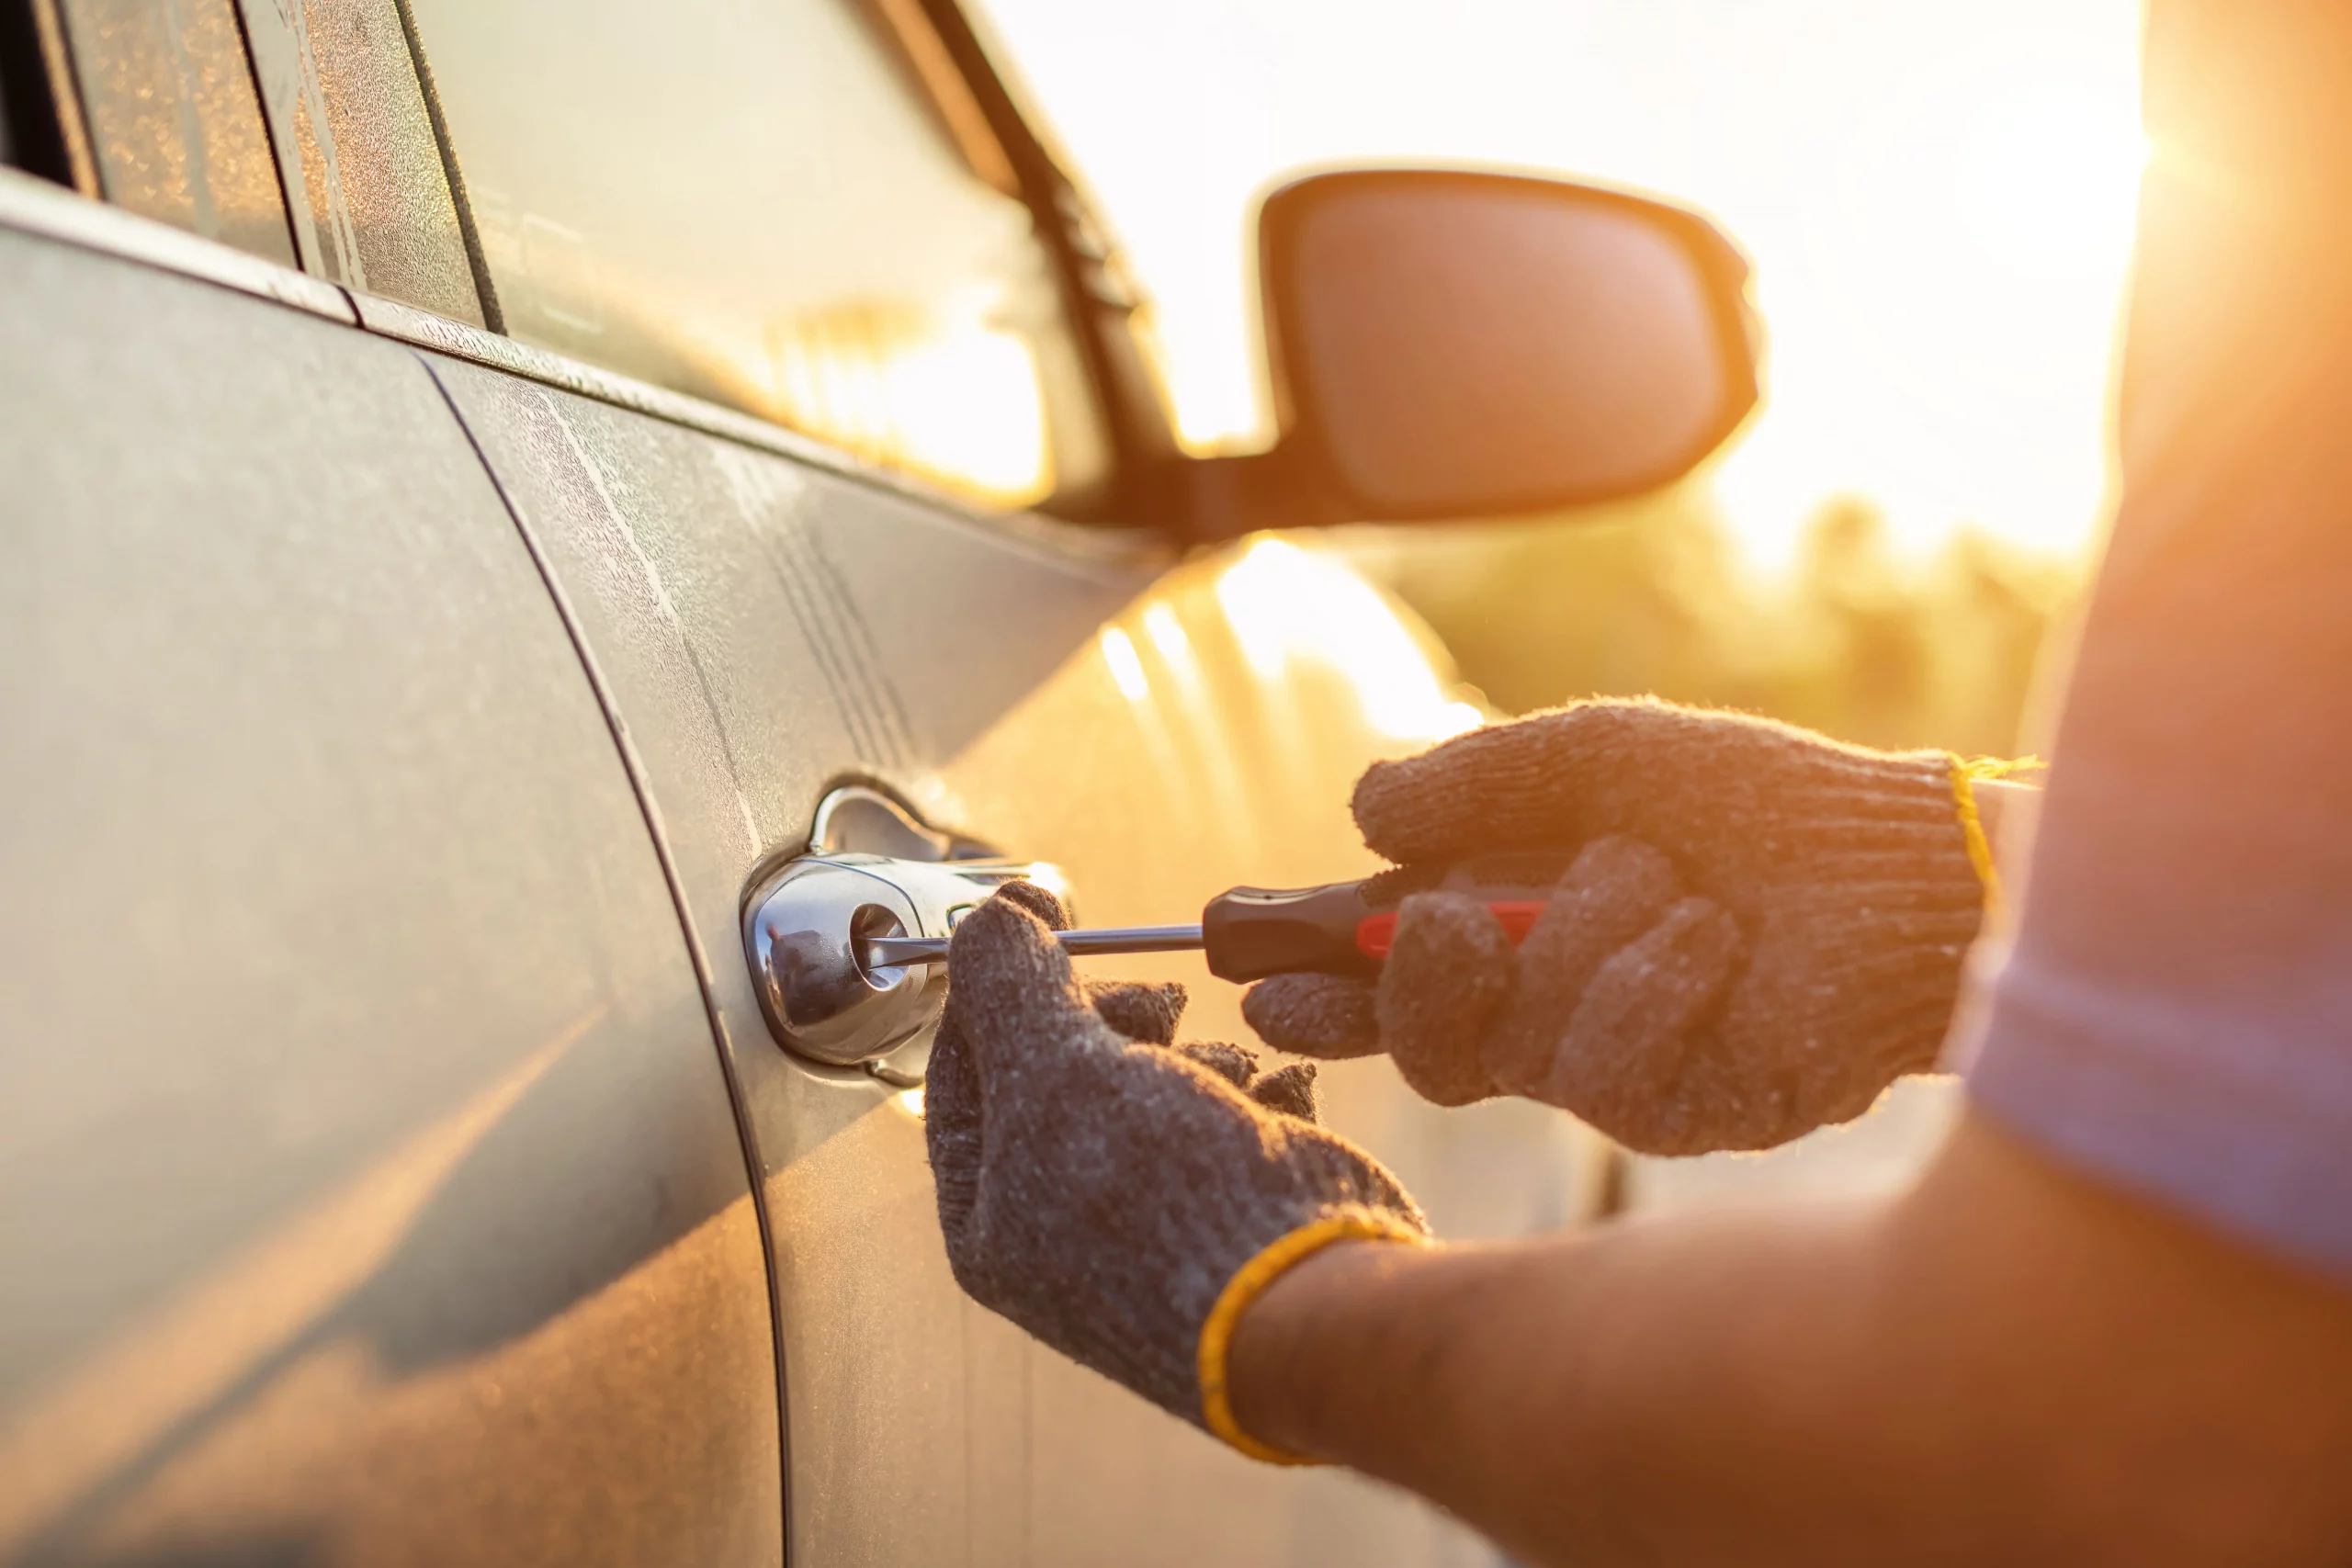 A car technician's hands in gloves using a screwdriver on a car door lock at sunset, symbolizing repair and maintenance.